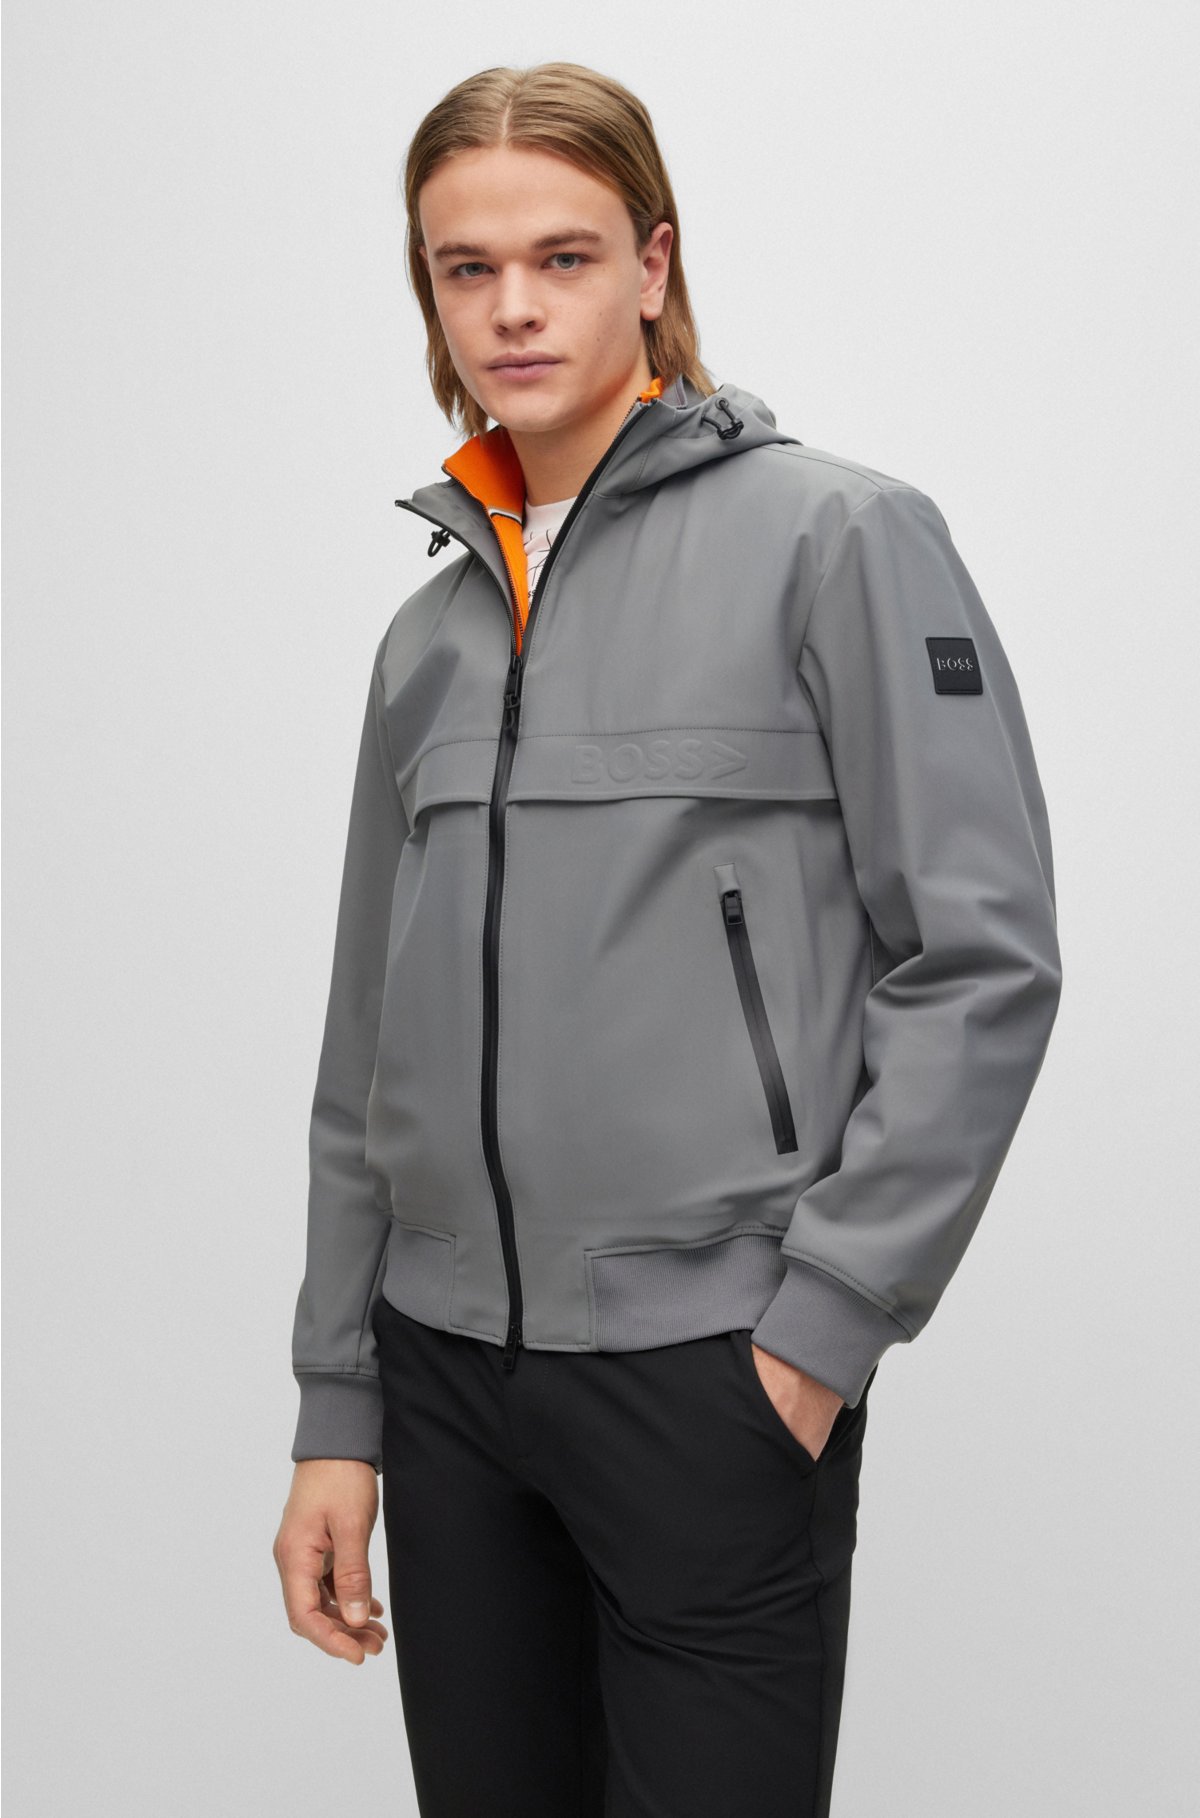 Insister Ithaca Troubled BOSS - Water-repellent blouson jacket with 3D logo print